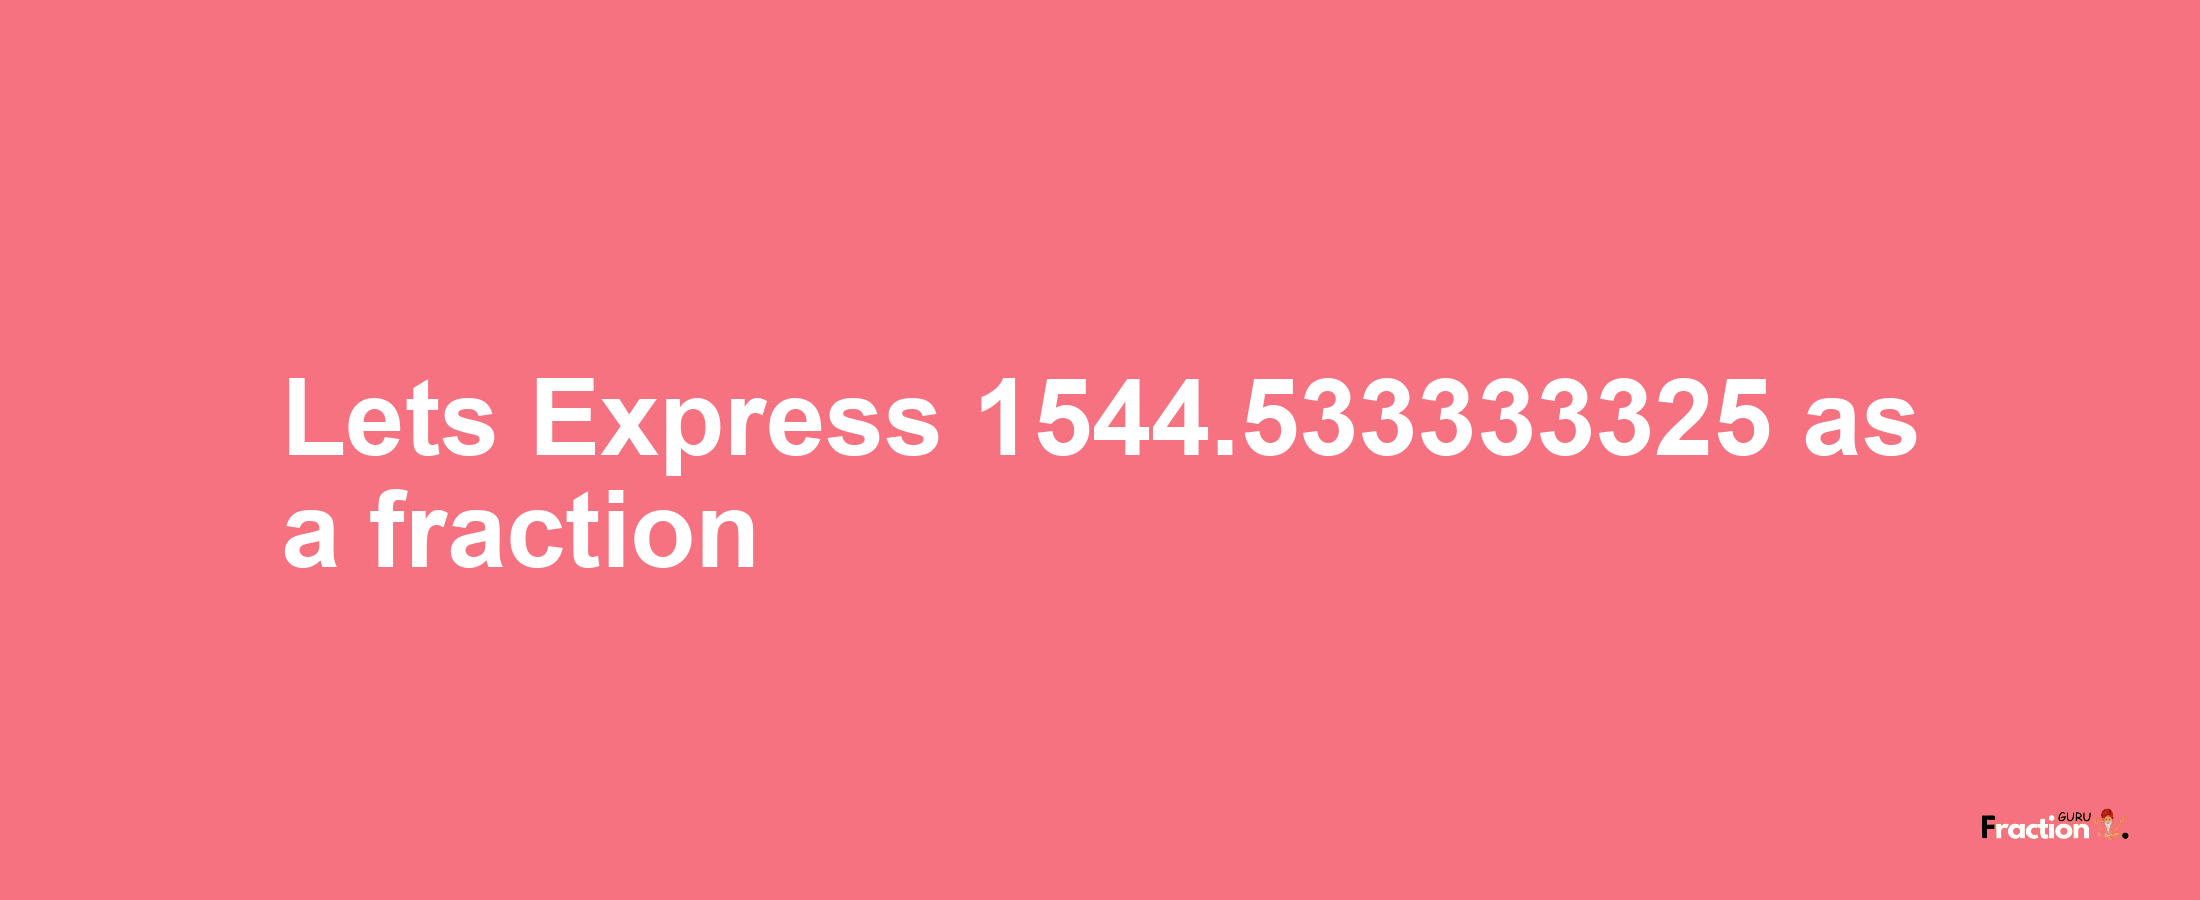 Lets Express 1544.533333325 as afraction